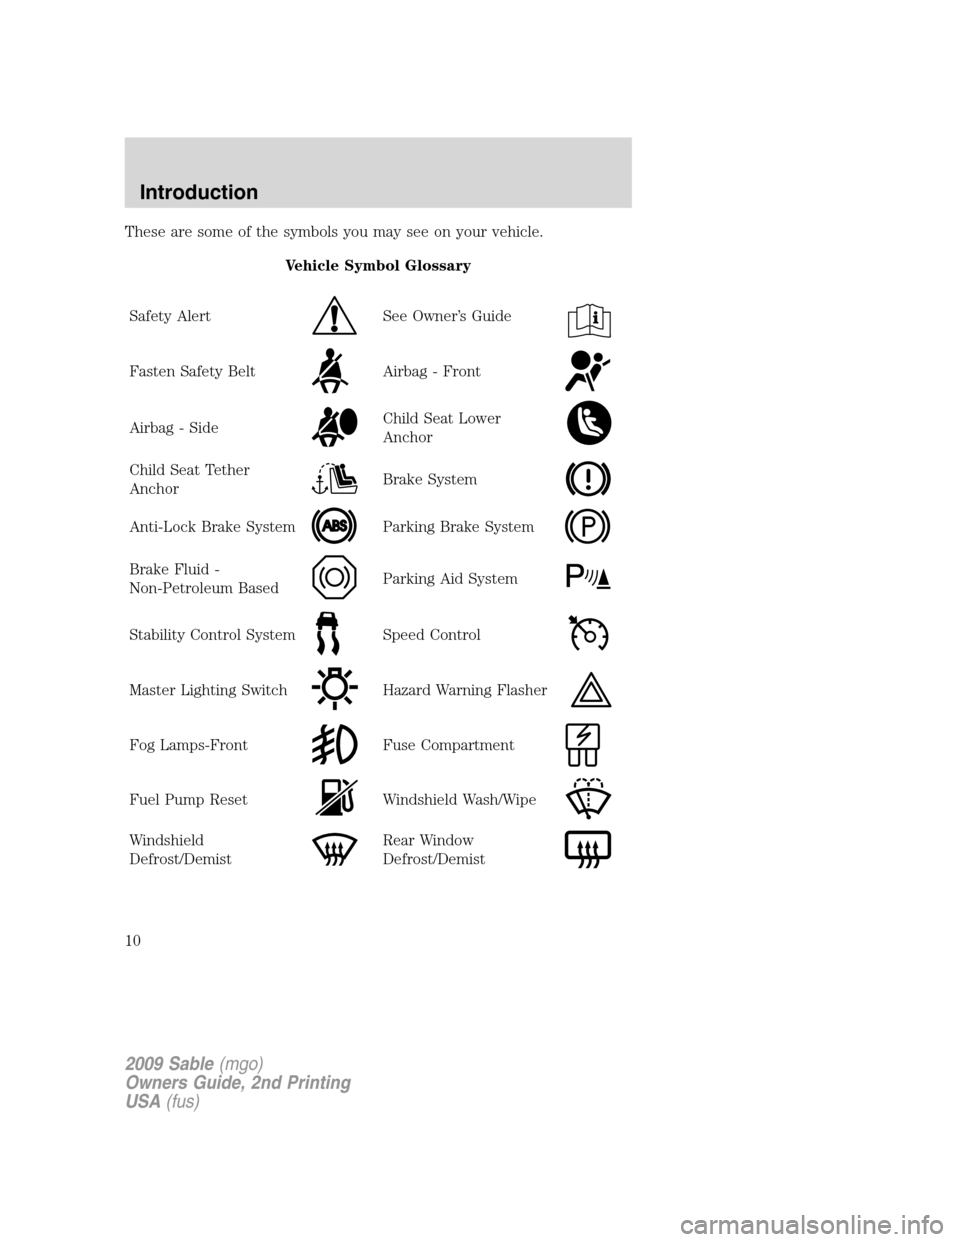 Mercury Sable 2009  Owners Manuals These are some of the symbols you may see on your vehicle.
Vehicle Symbol Glossary
Safety Alert
See Owner’s Guide
Fasten Safety BeltAirbag - Front
Airbag - SideChild Seat Lower
Anchor
Child Seat Tet